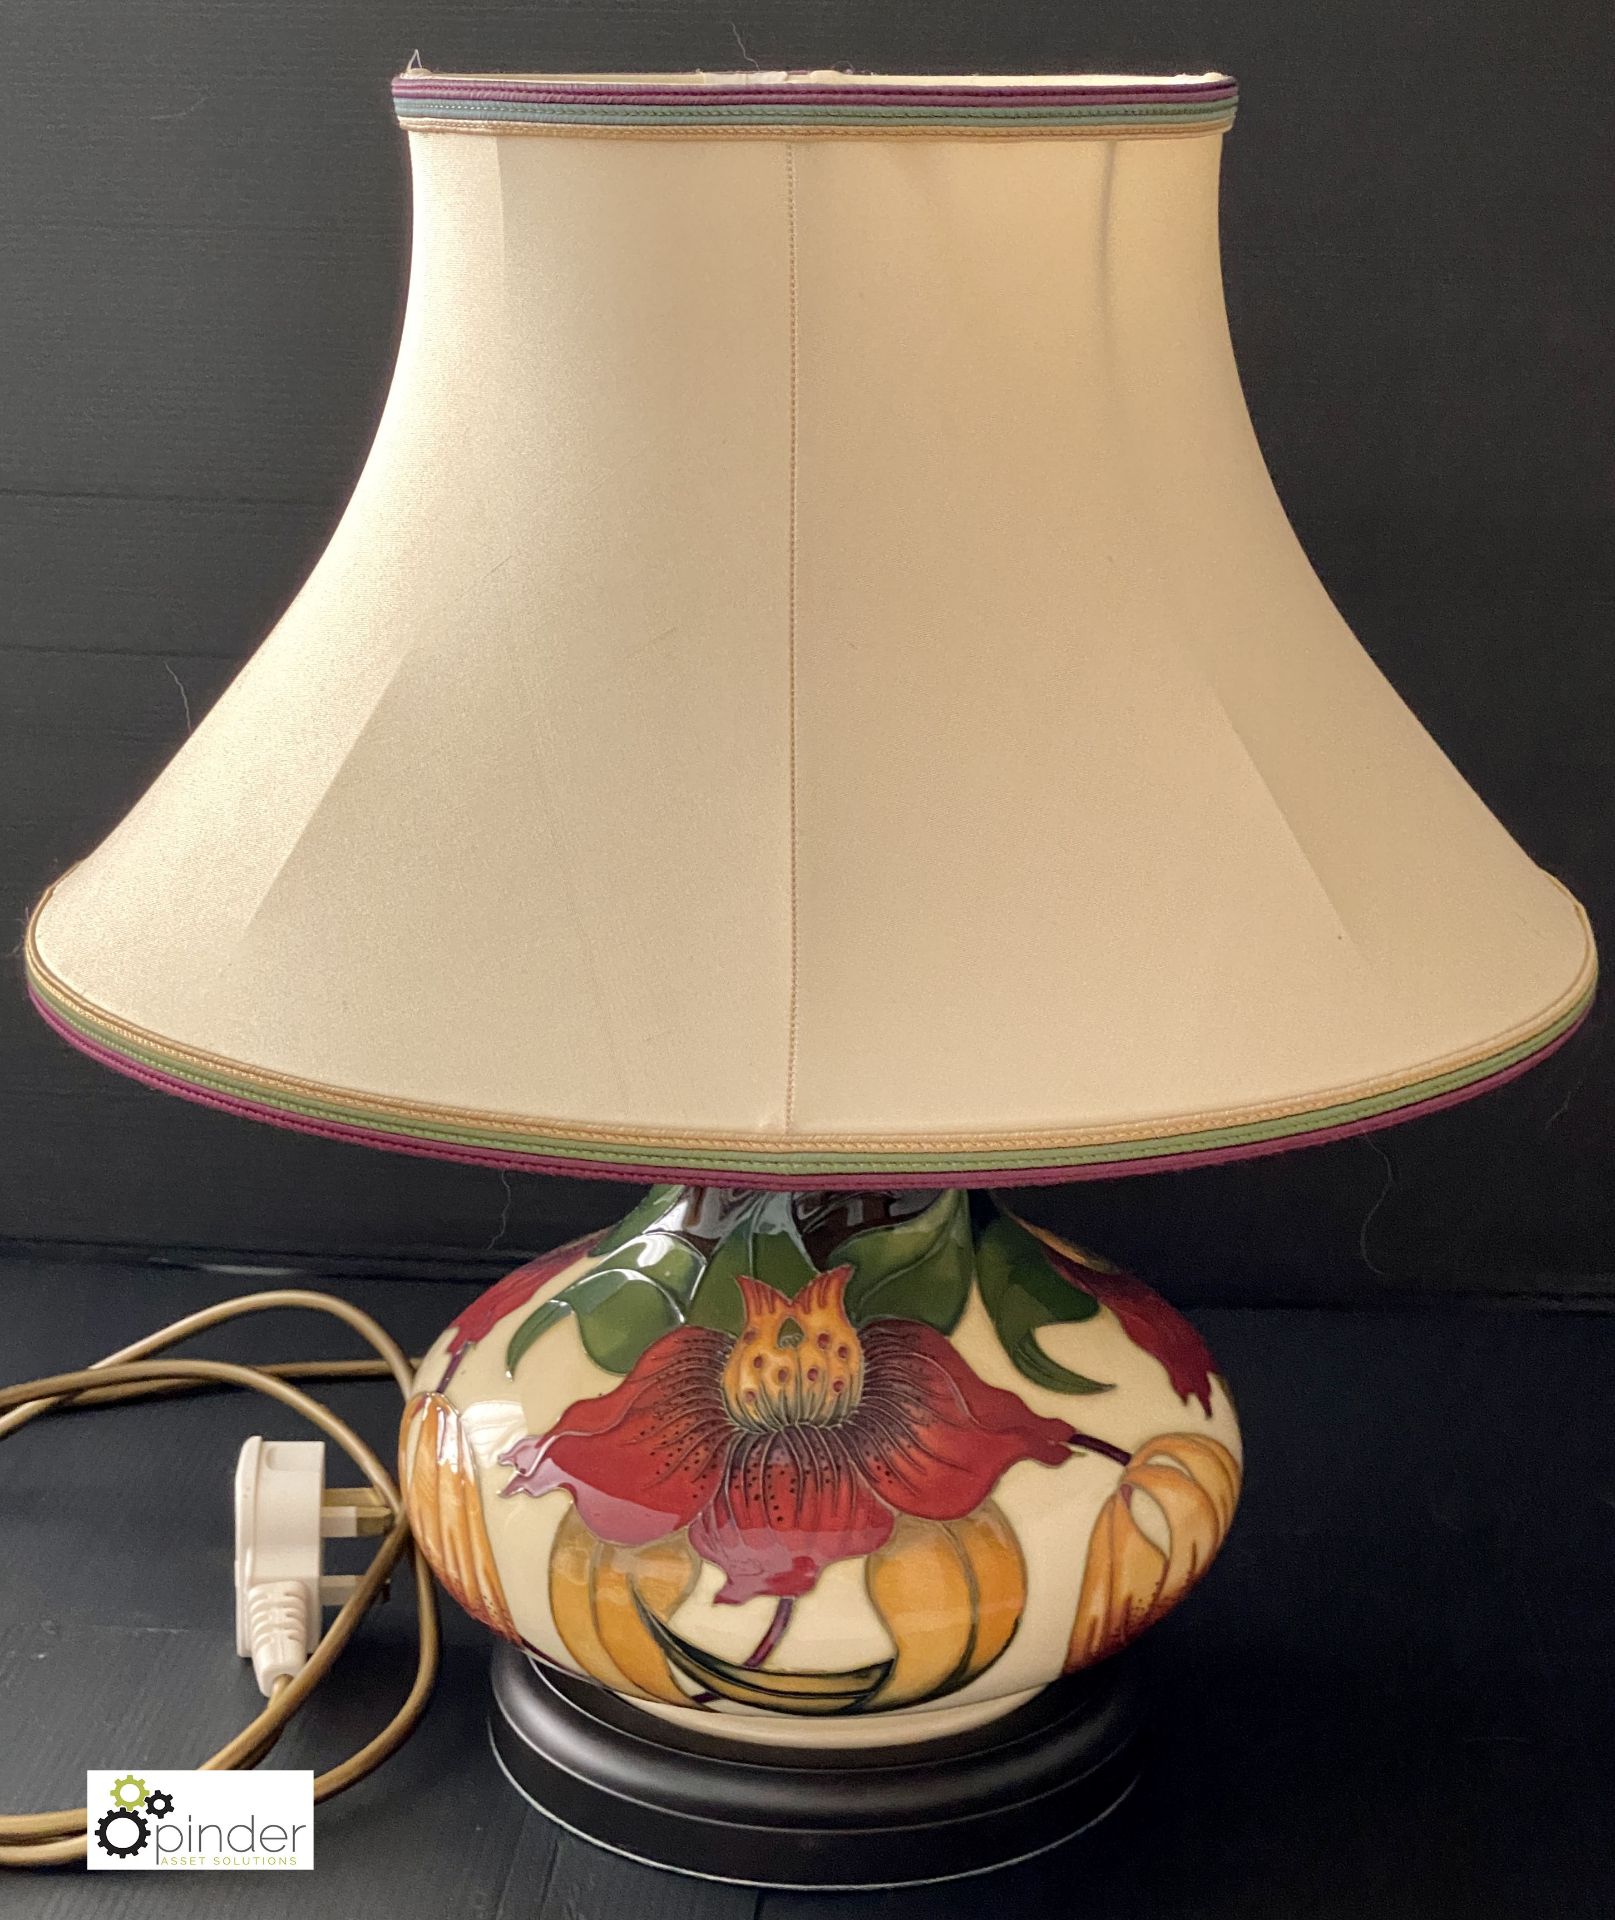 Moorcroft Anna Lily Table lamp, model L32/8, designed by Nicola Slaney, includes matching shade - Image 3 of 10